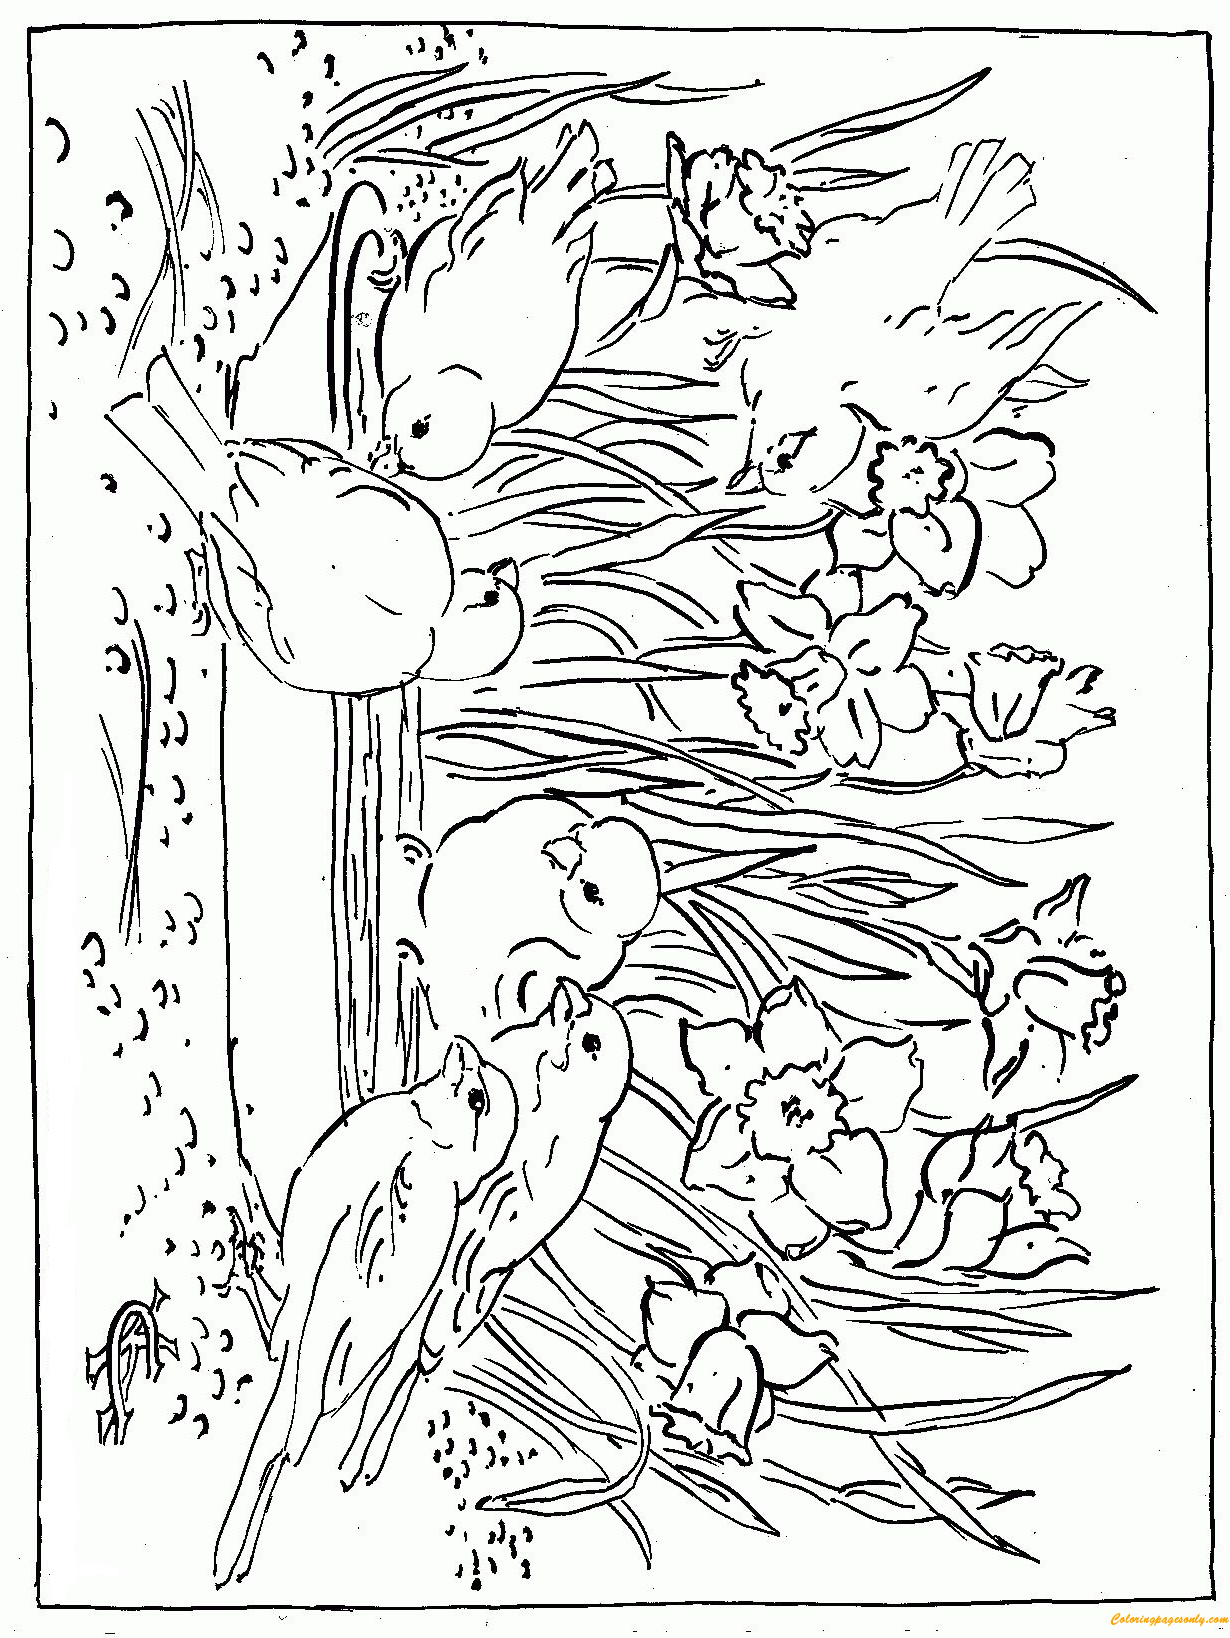 Download Awesome Nature Scene Coloring Page - Free Coloring Pages Online